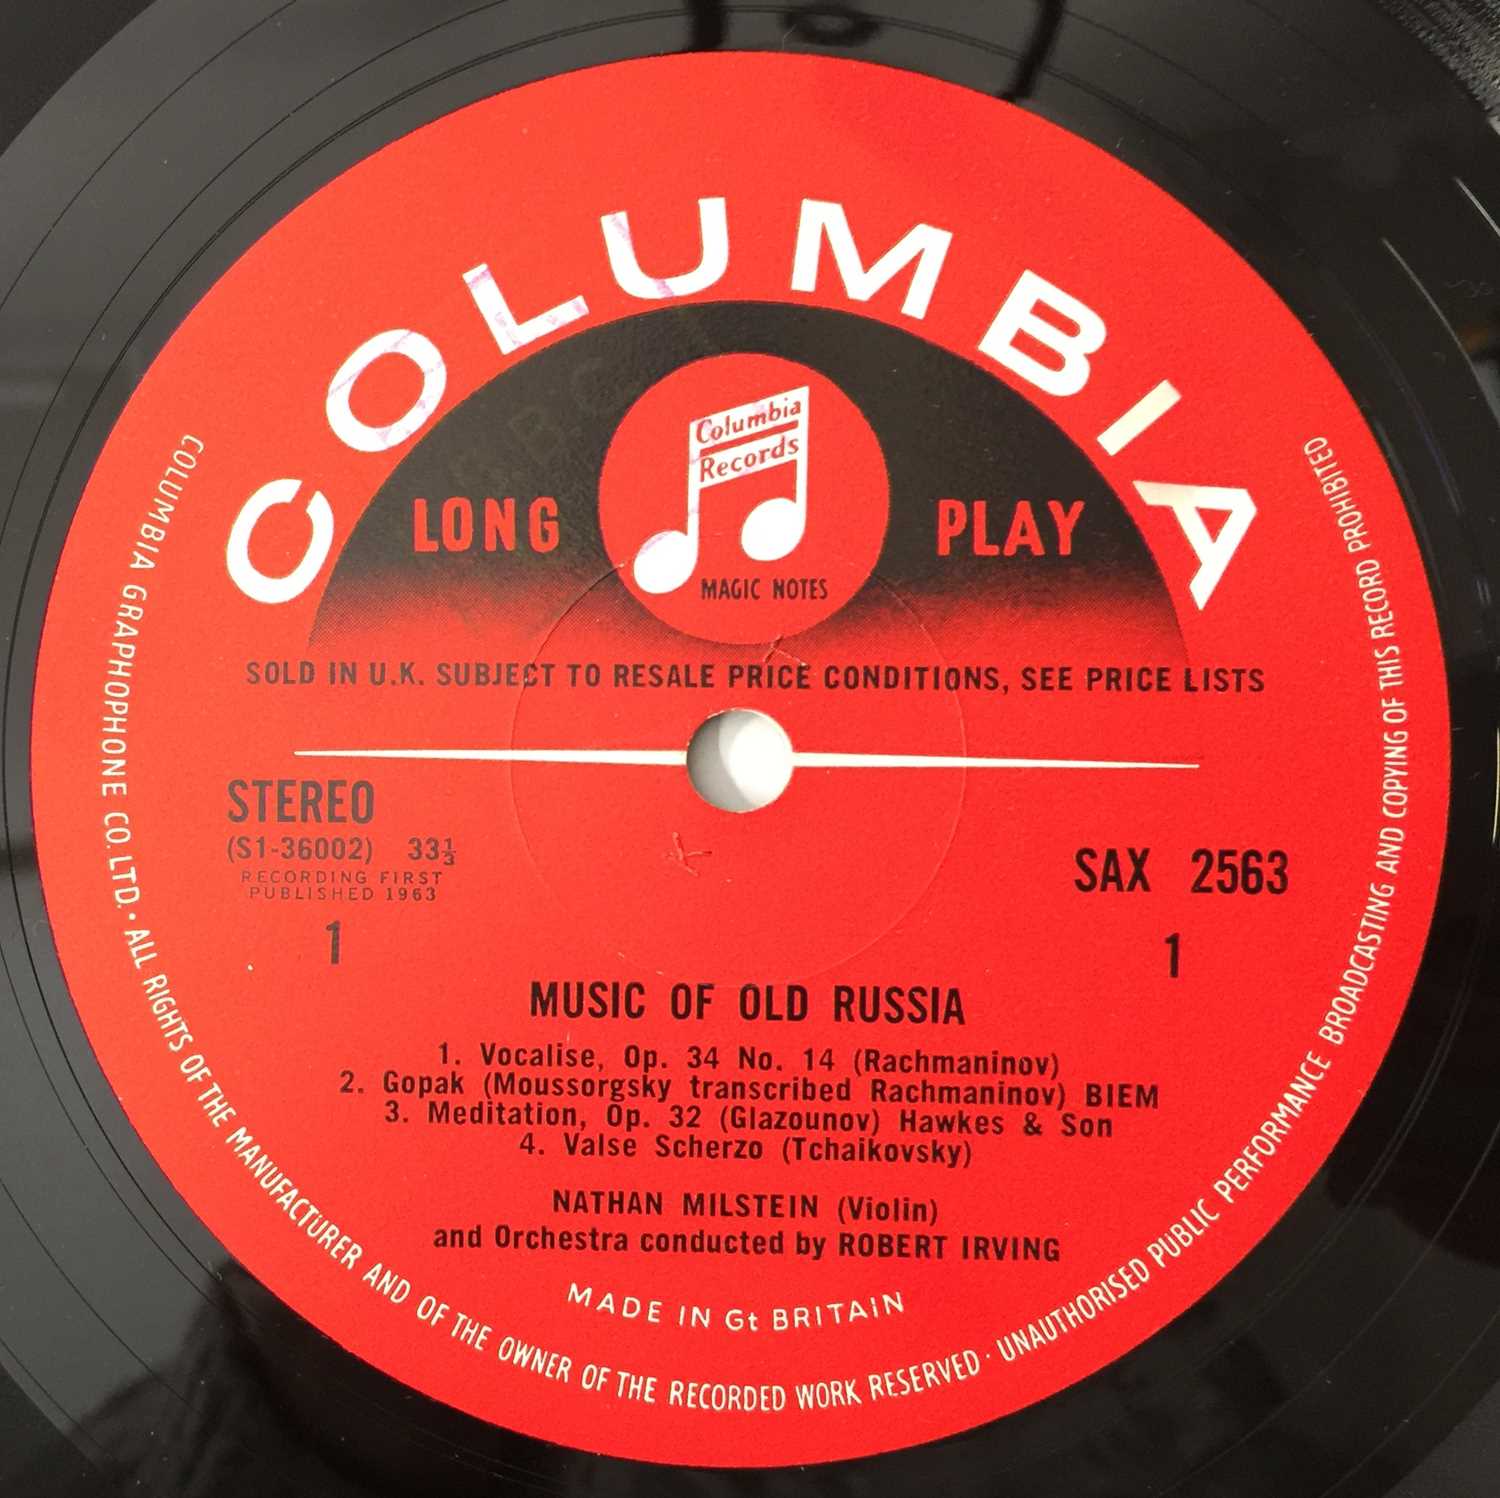 NATHAN MILSTEIN - MUSIC OF OLD RUSSIA LP (ORIGINAL UK STEREO RECORDING - COLUMBIA SAX 2563) - Image 4 of 5